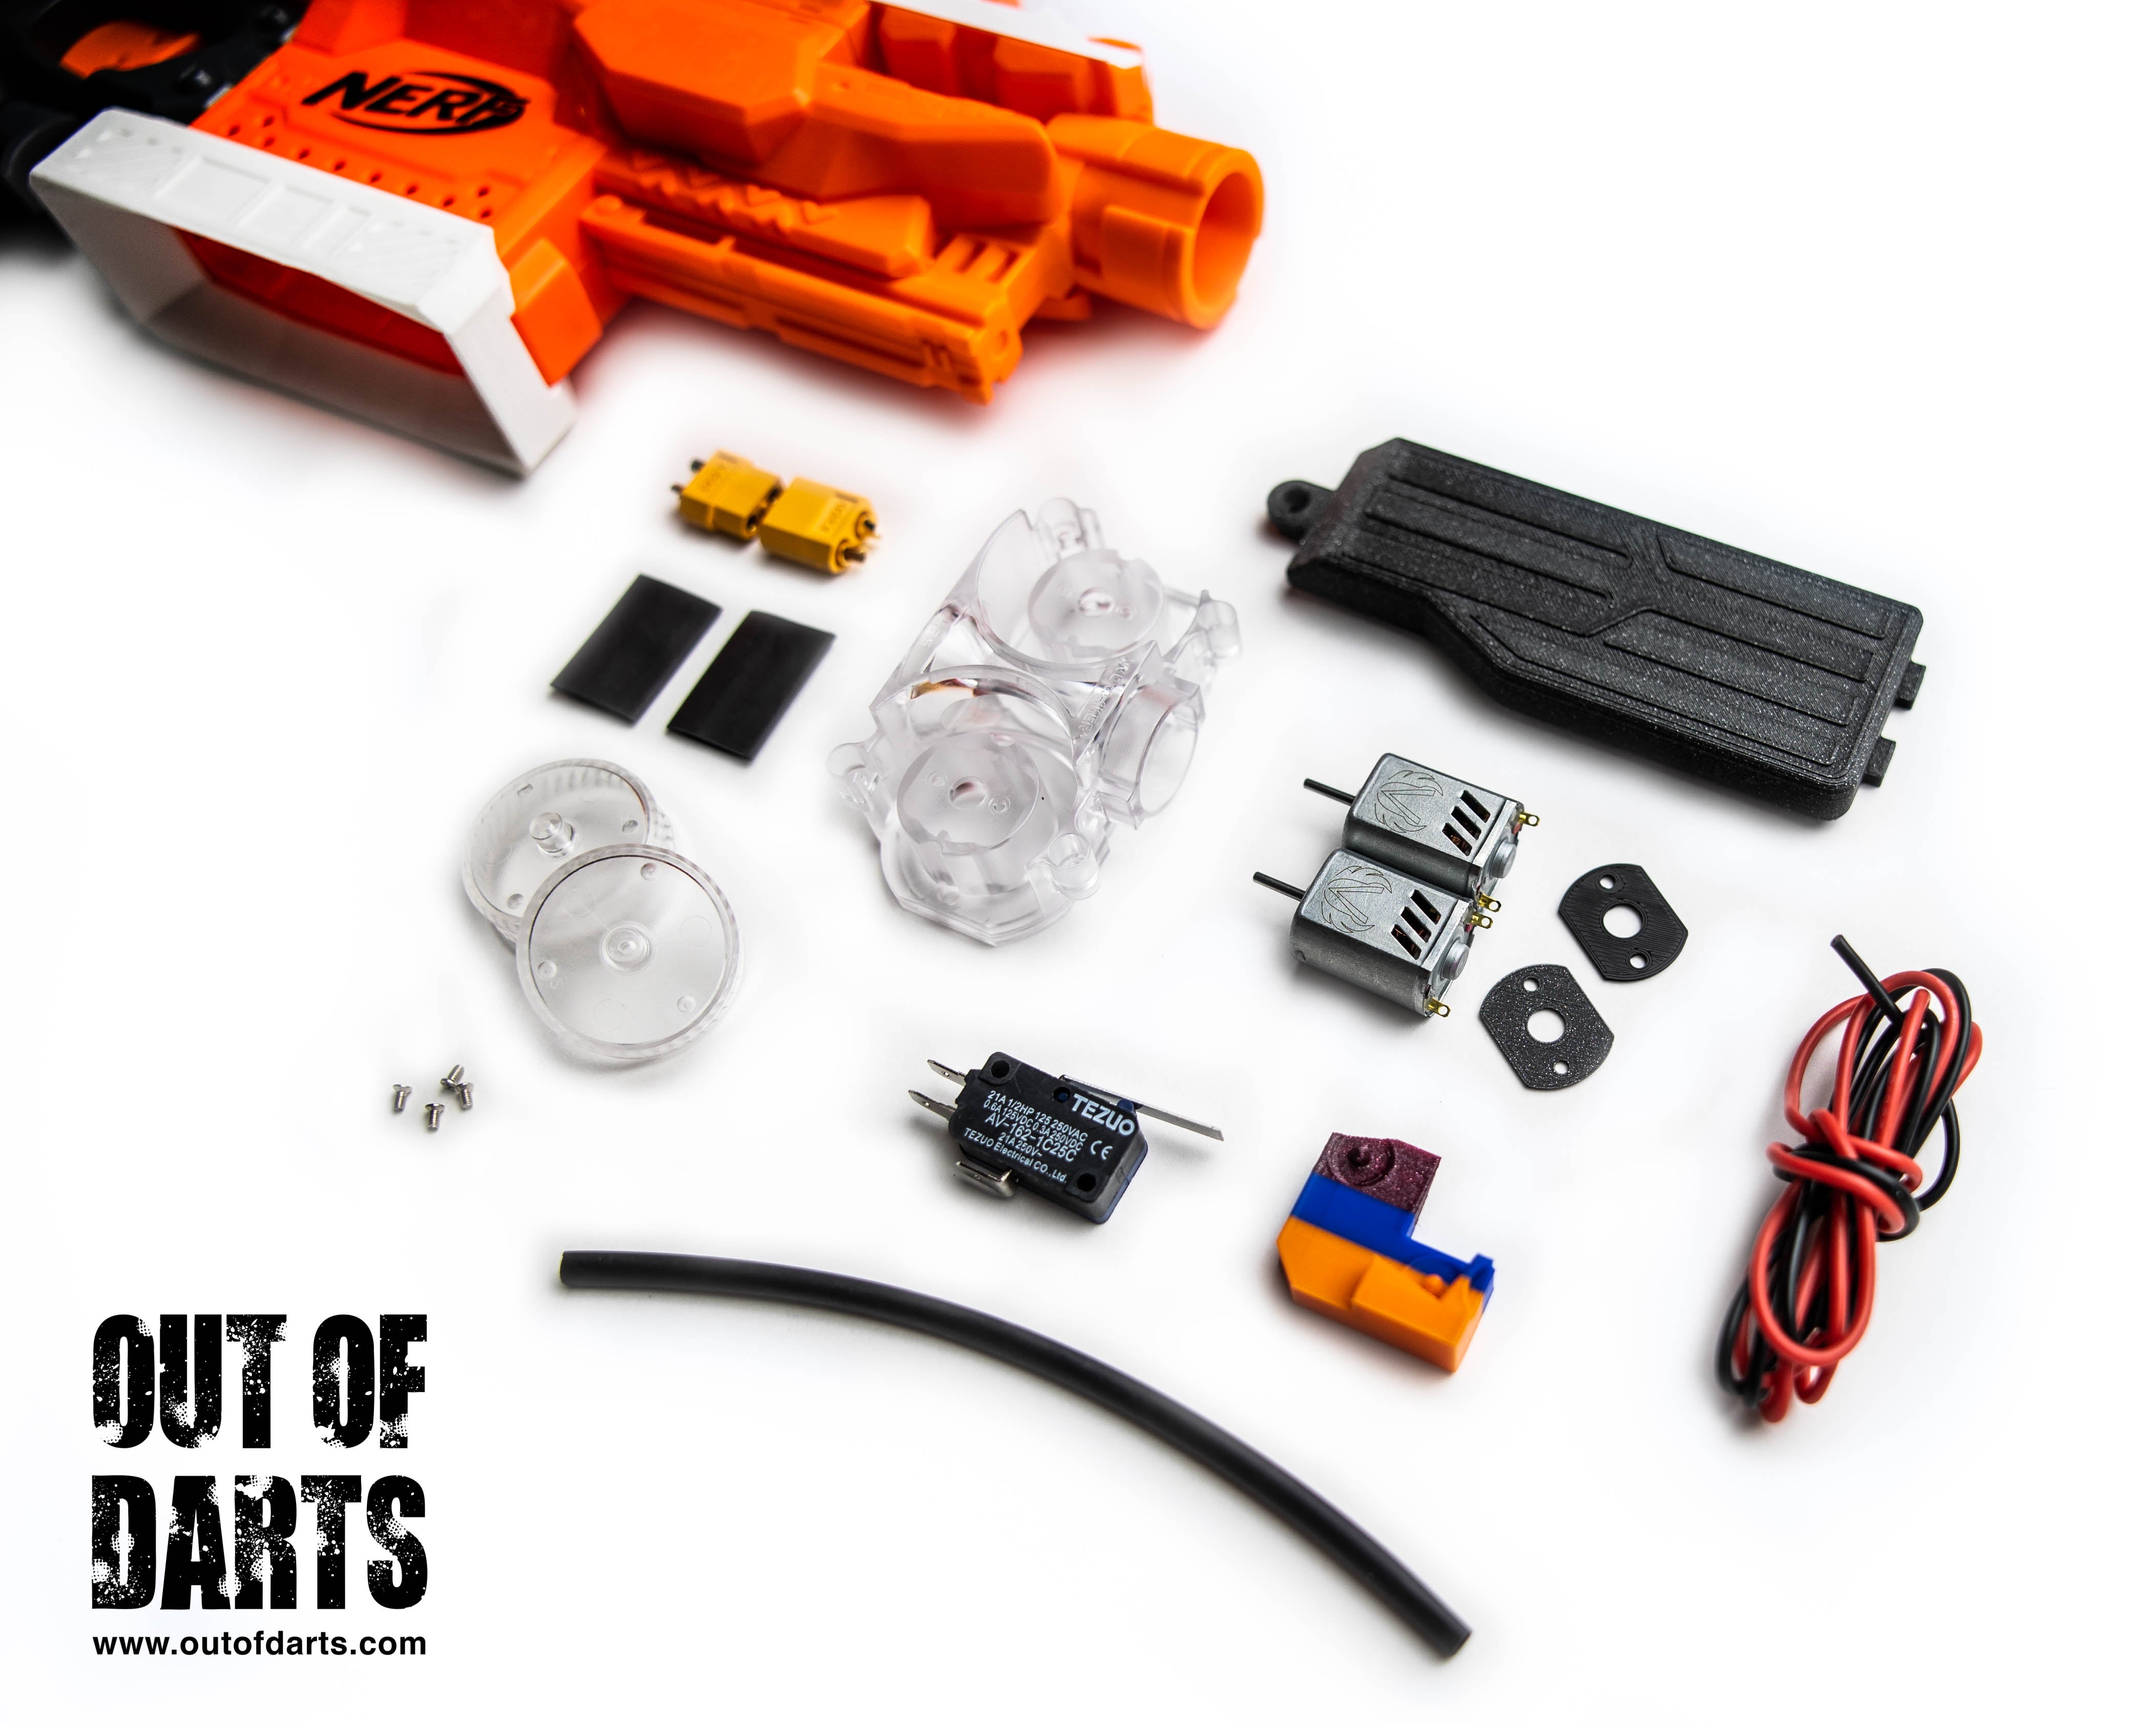 3s Entry-Level Mod Kit – Out Darts